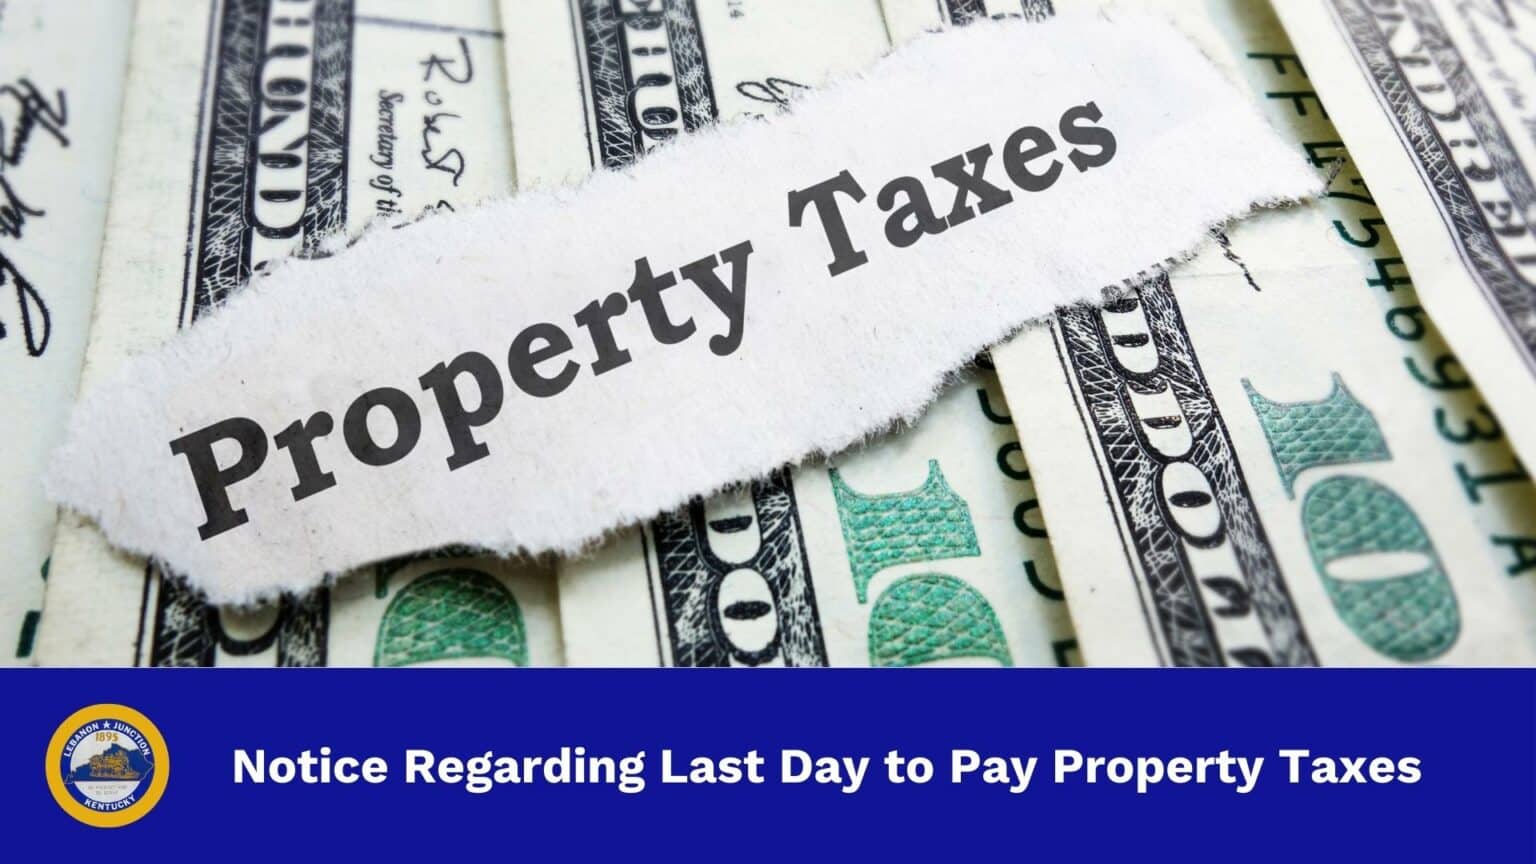 Important Notice Regarding Last Day to Pay Property Taxes City of